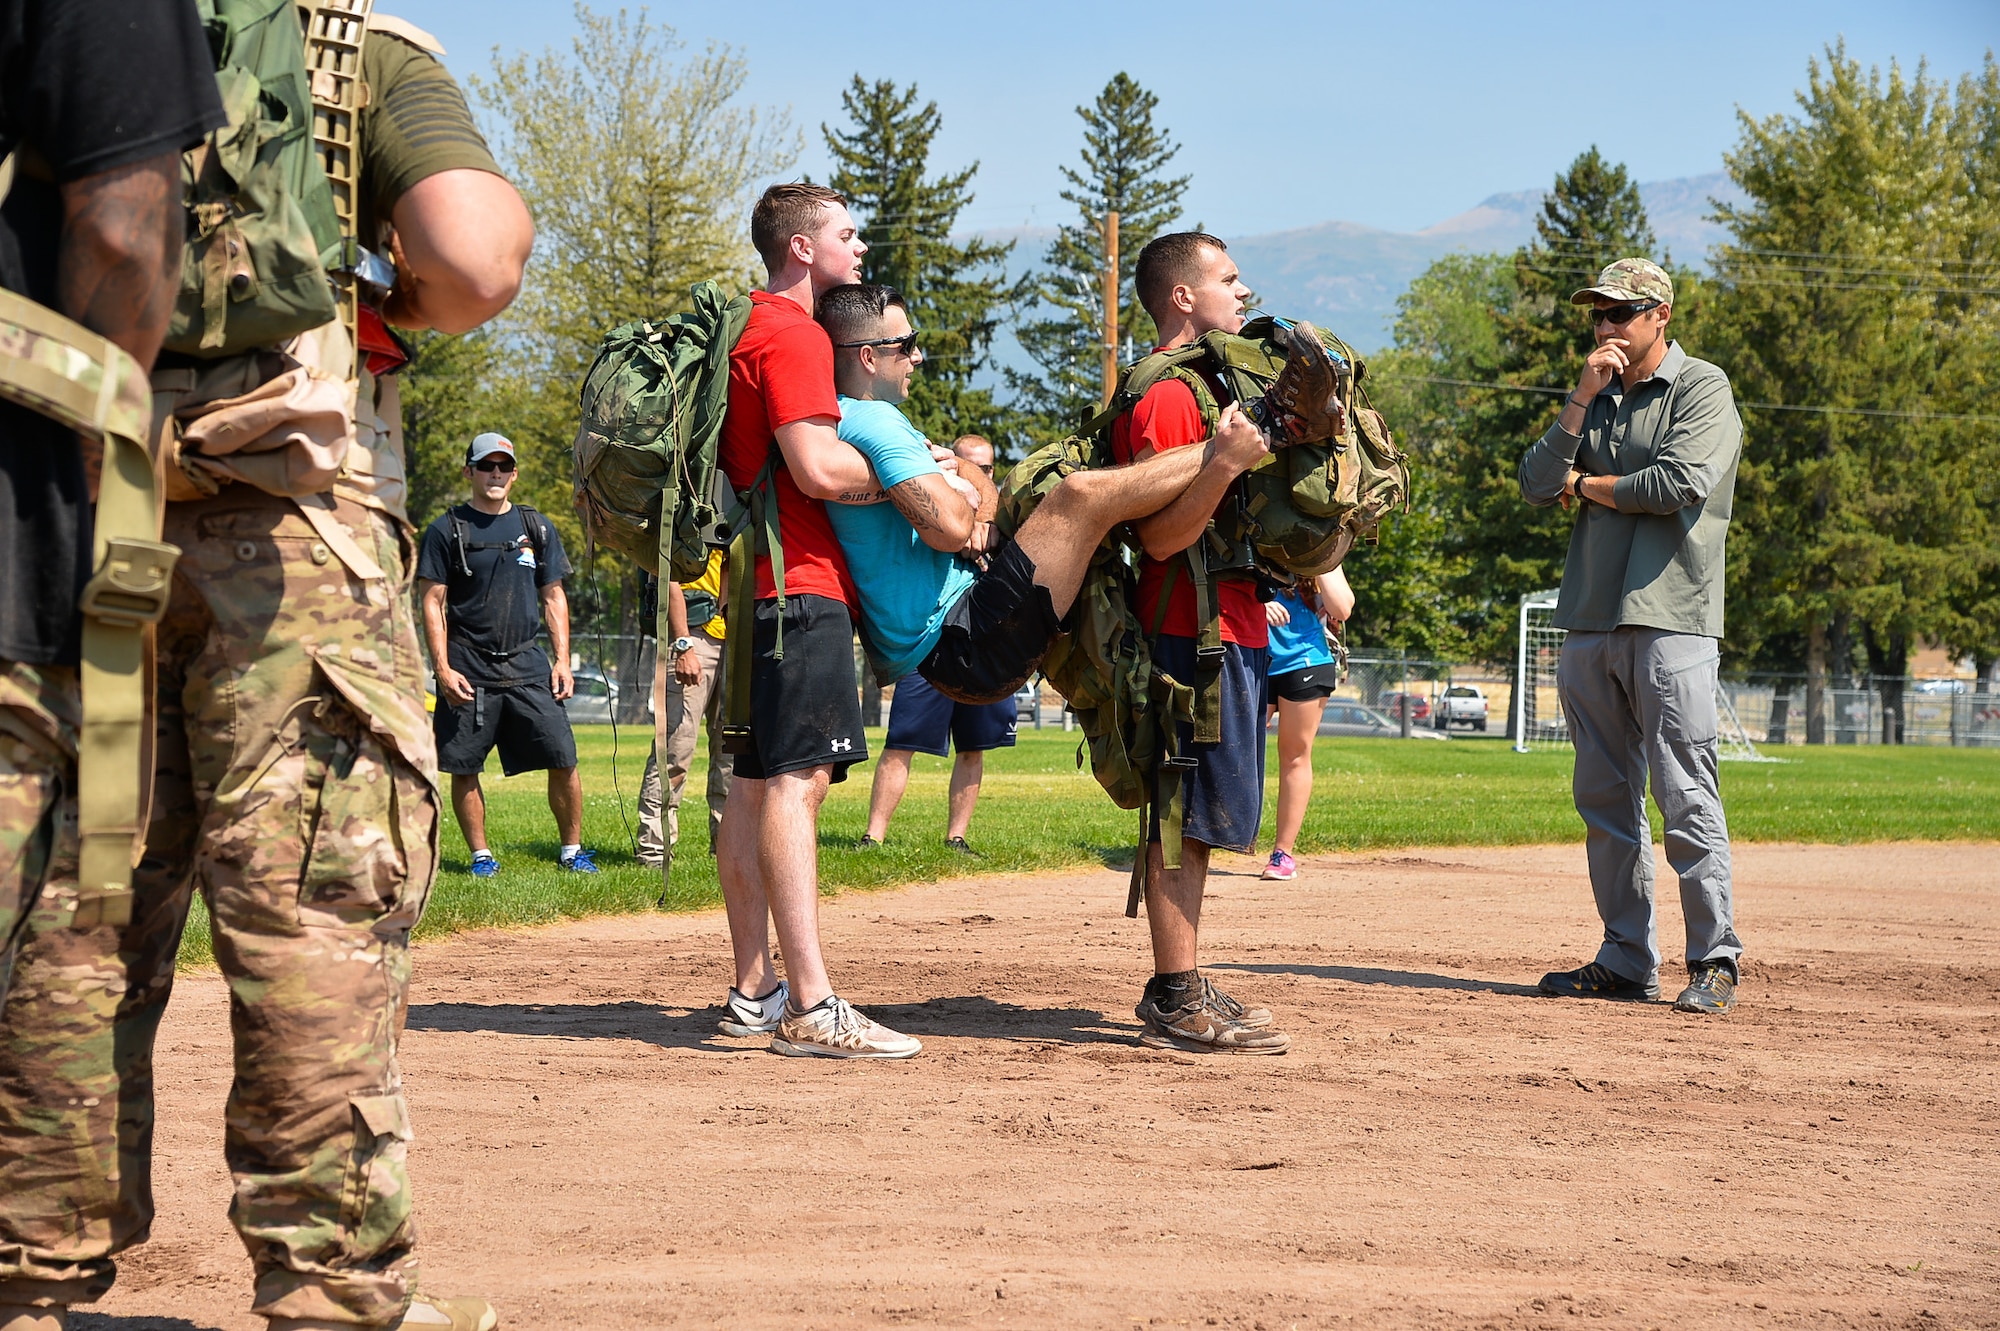 GoRuck participants demonstrate team cohesion during a challenge exercise at Hill Air Force Base, Utah, Aug. 19, 2016. (U.S. Air Force photo by R. Nial Bradshaw)